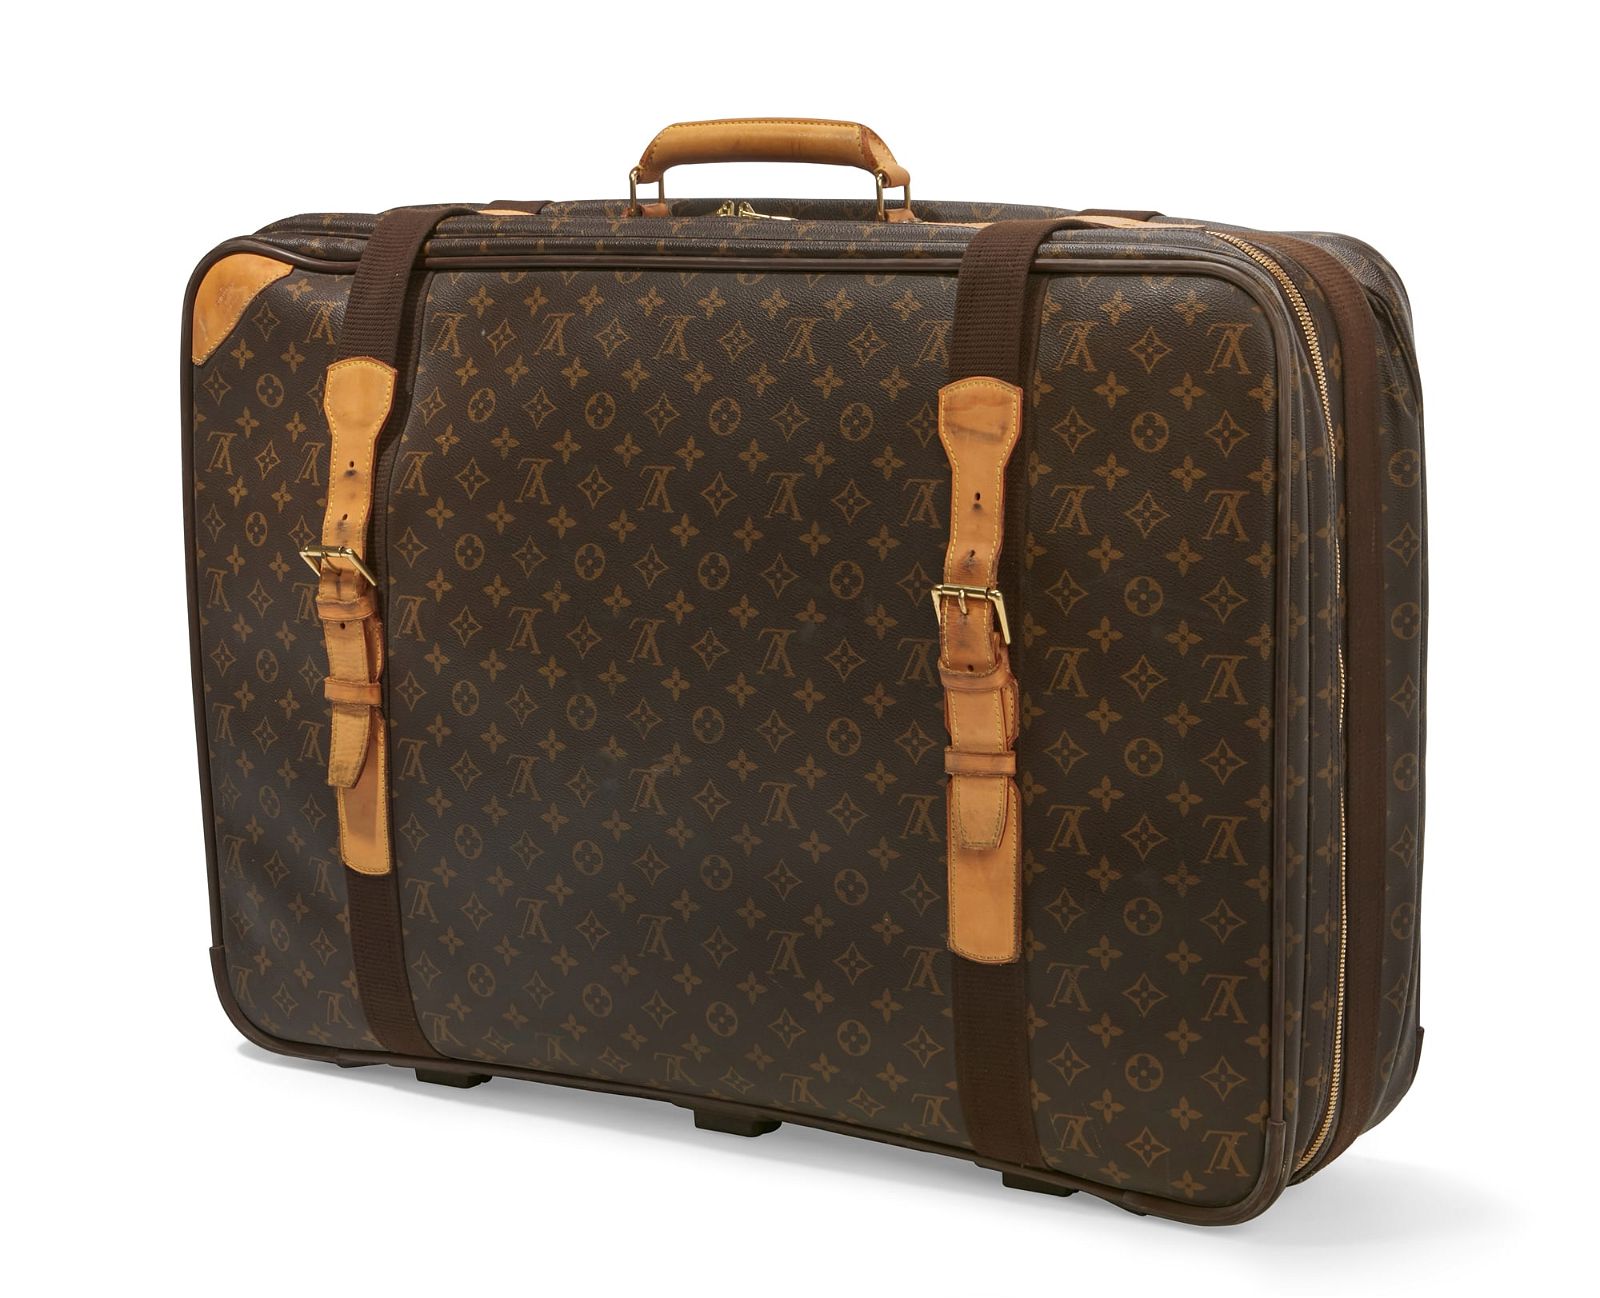 A LOUIS VUITTON SOFT SIDED SUITCASEA 2fb36ab